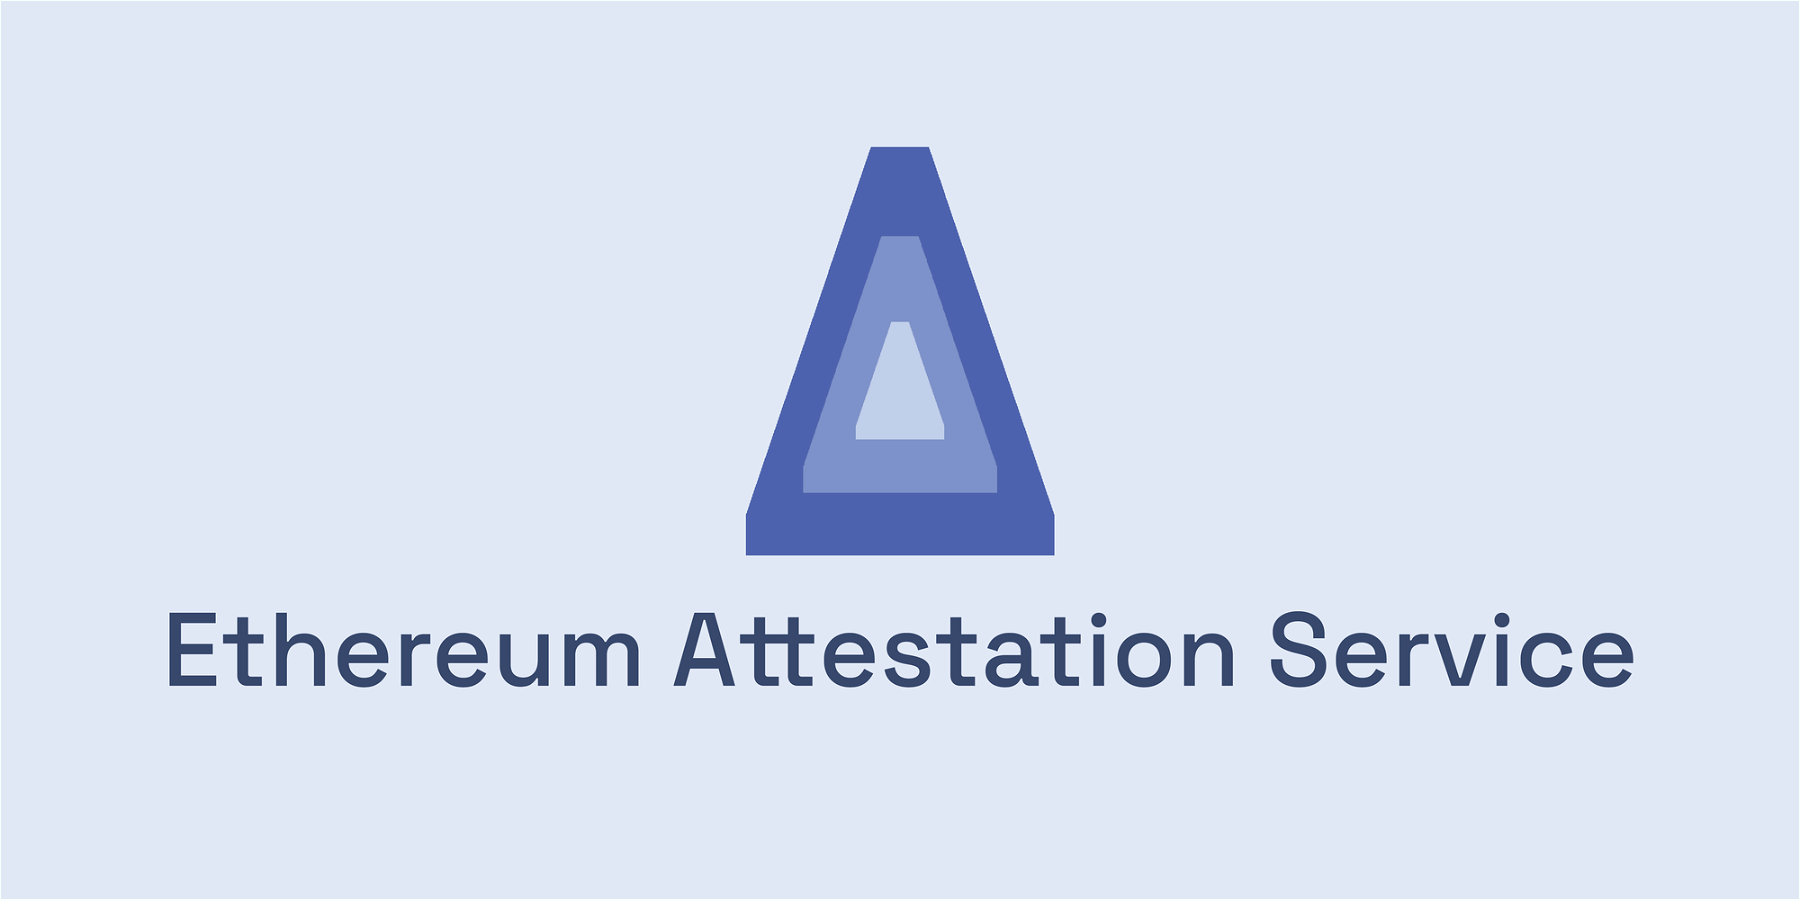 How to configure the Ethereum Attestation Service (EAS) Access Gate Requirement